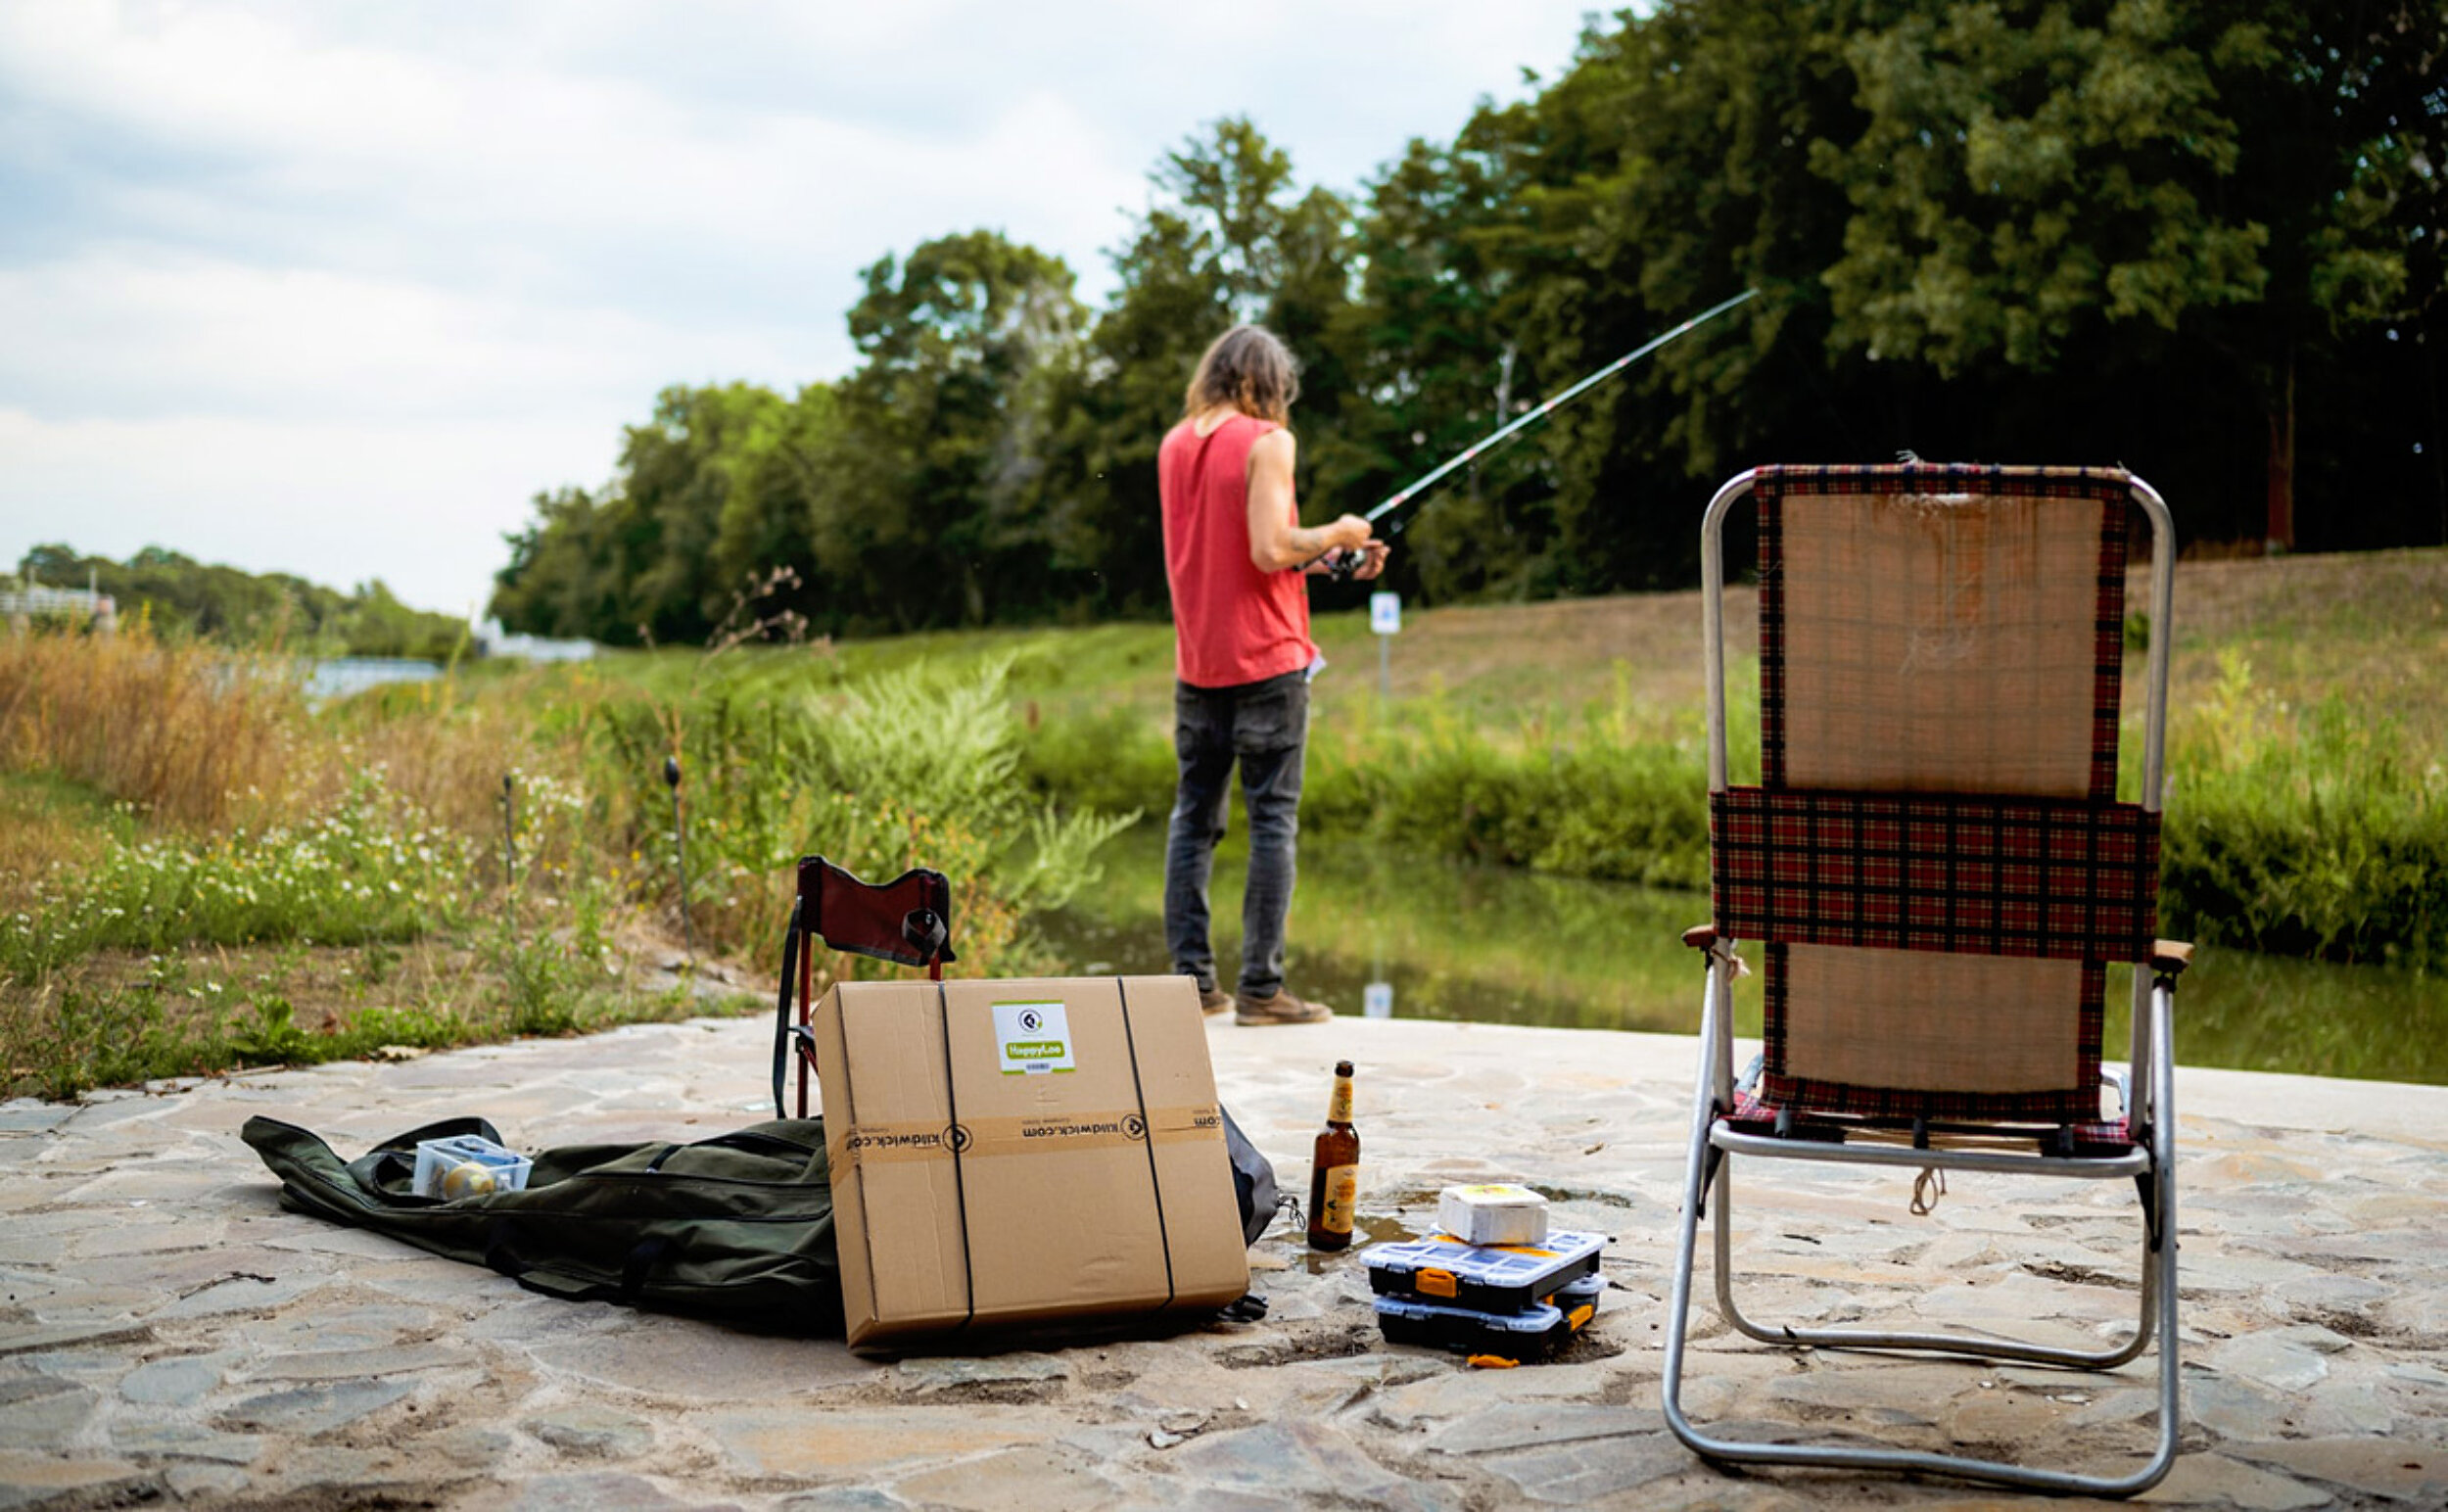 Our HappyLoo camping toilet is your companion on your fishing adventure